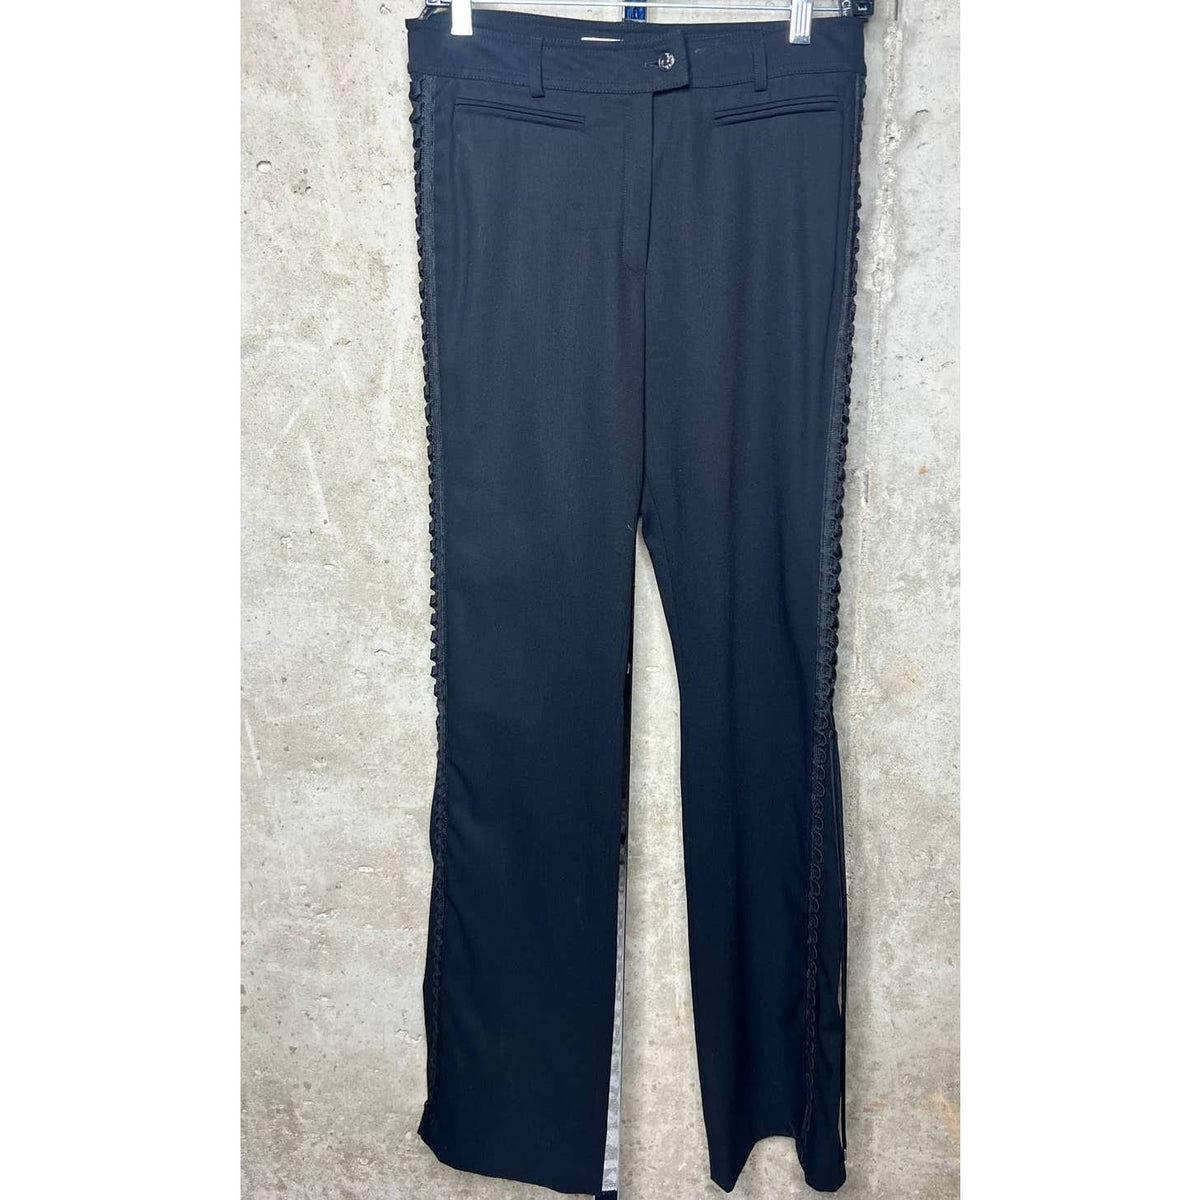 Christian Dior by John Galliano Lace Up Pants 1990s Sz.4